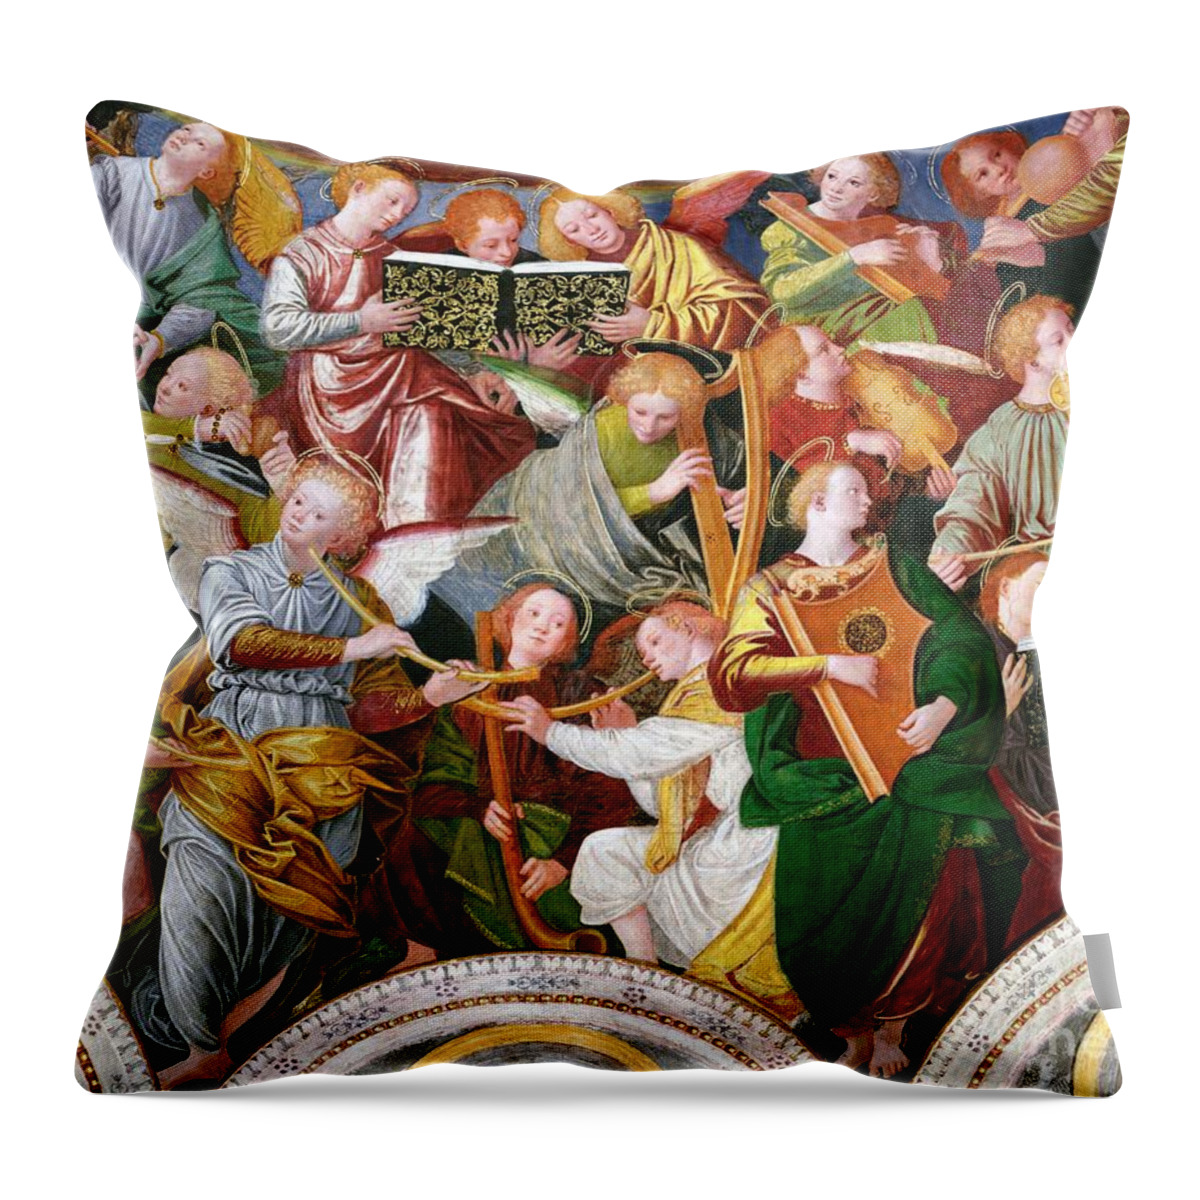 The Throw Pillow featuring the painting The Concert of Angels by Gaudenzio Ferrari